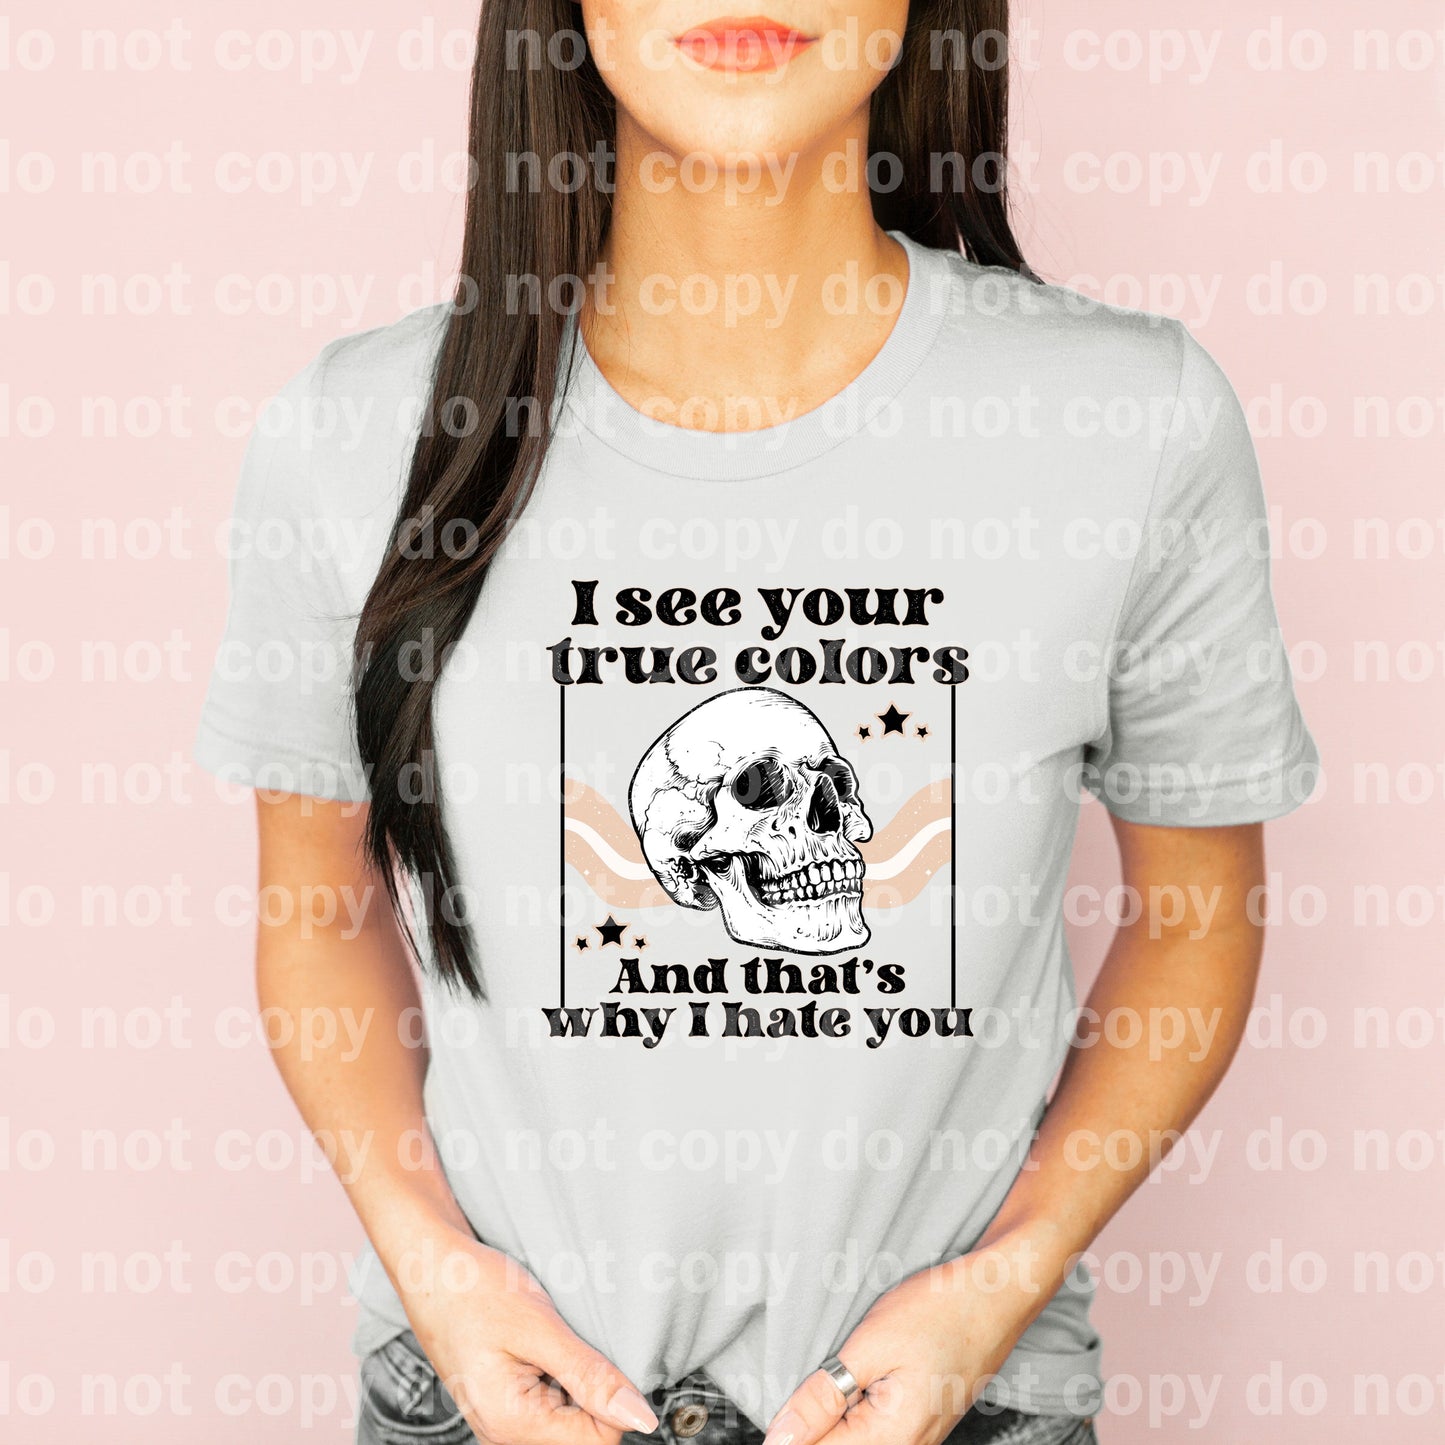 I See Your True Colors And That's Why I Hate You Dream Print or Sublimation Print